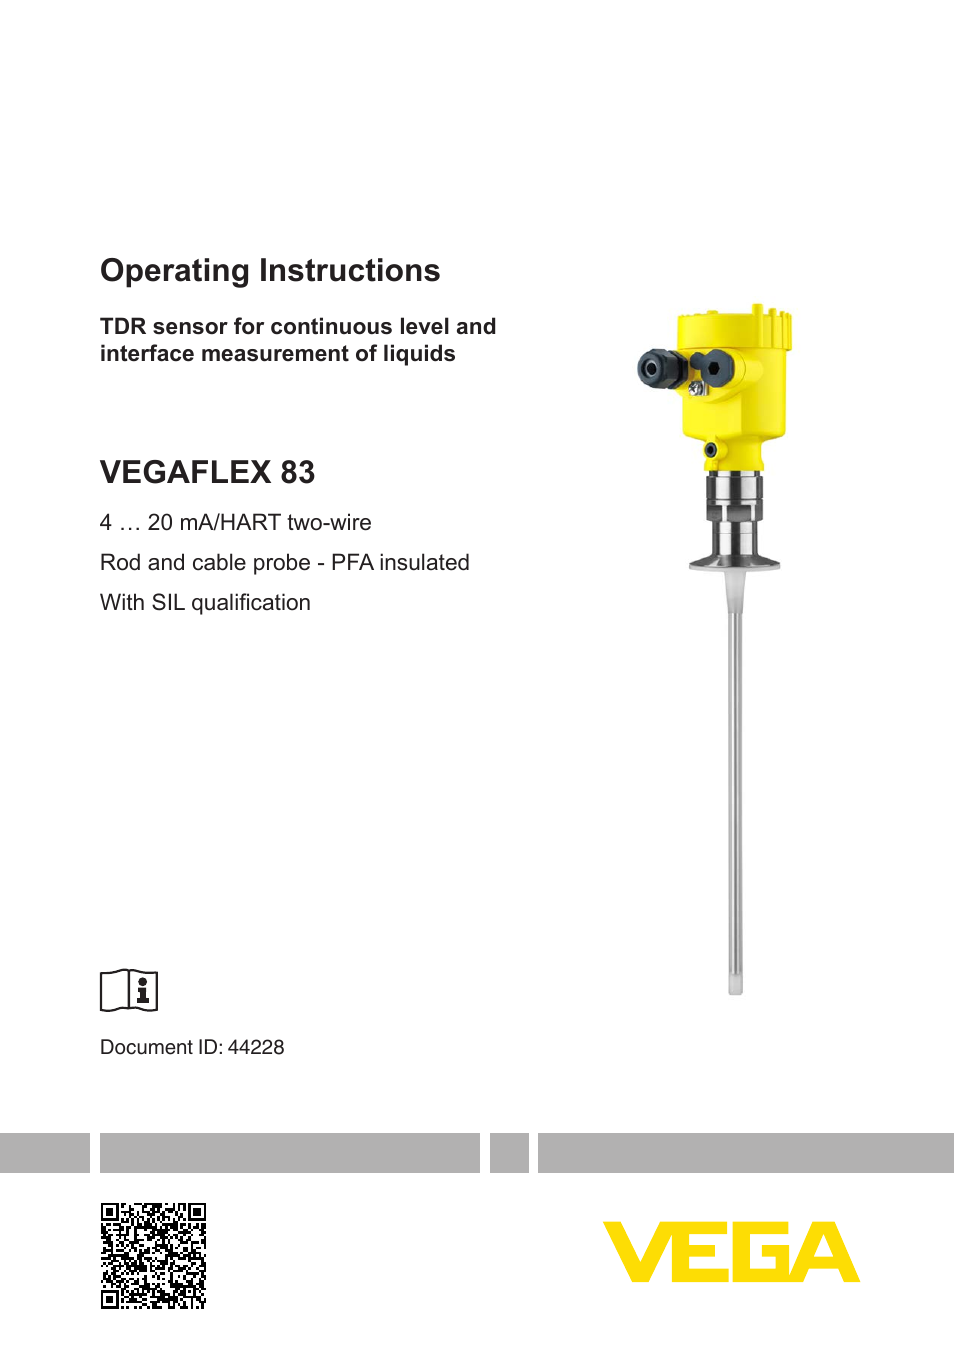 VEGAFLEX 83 4 … 20 mA_HART two-wire Rod and cable probe - PFA insulated With SIL qualification